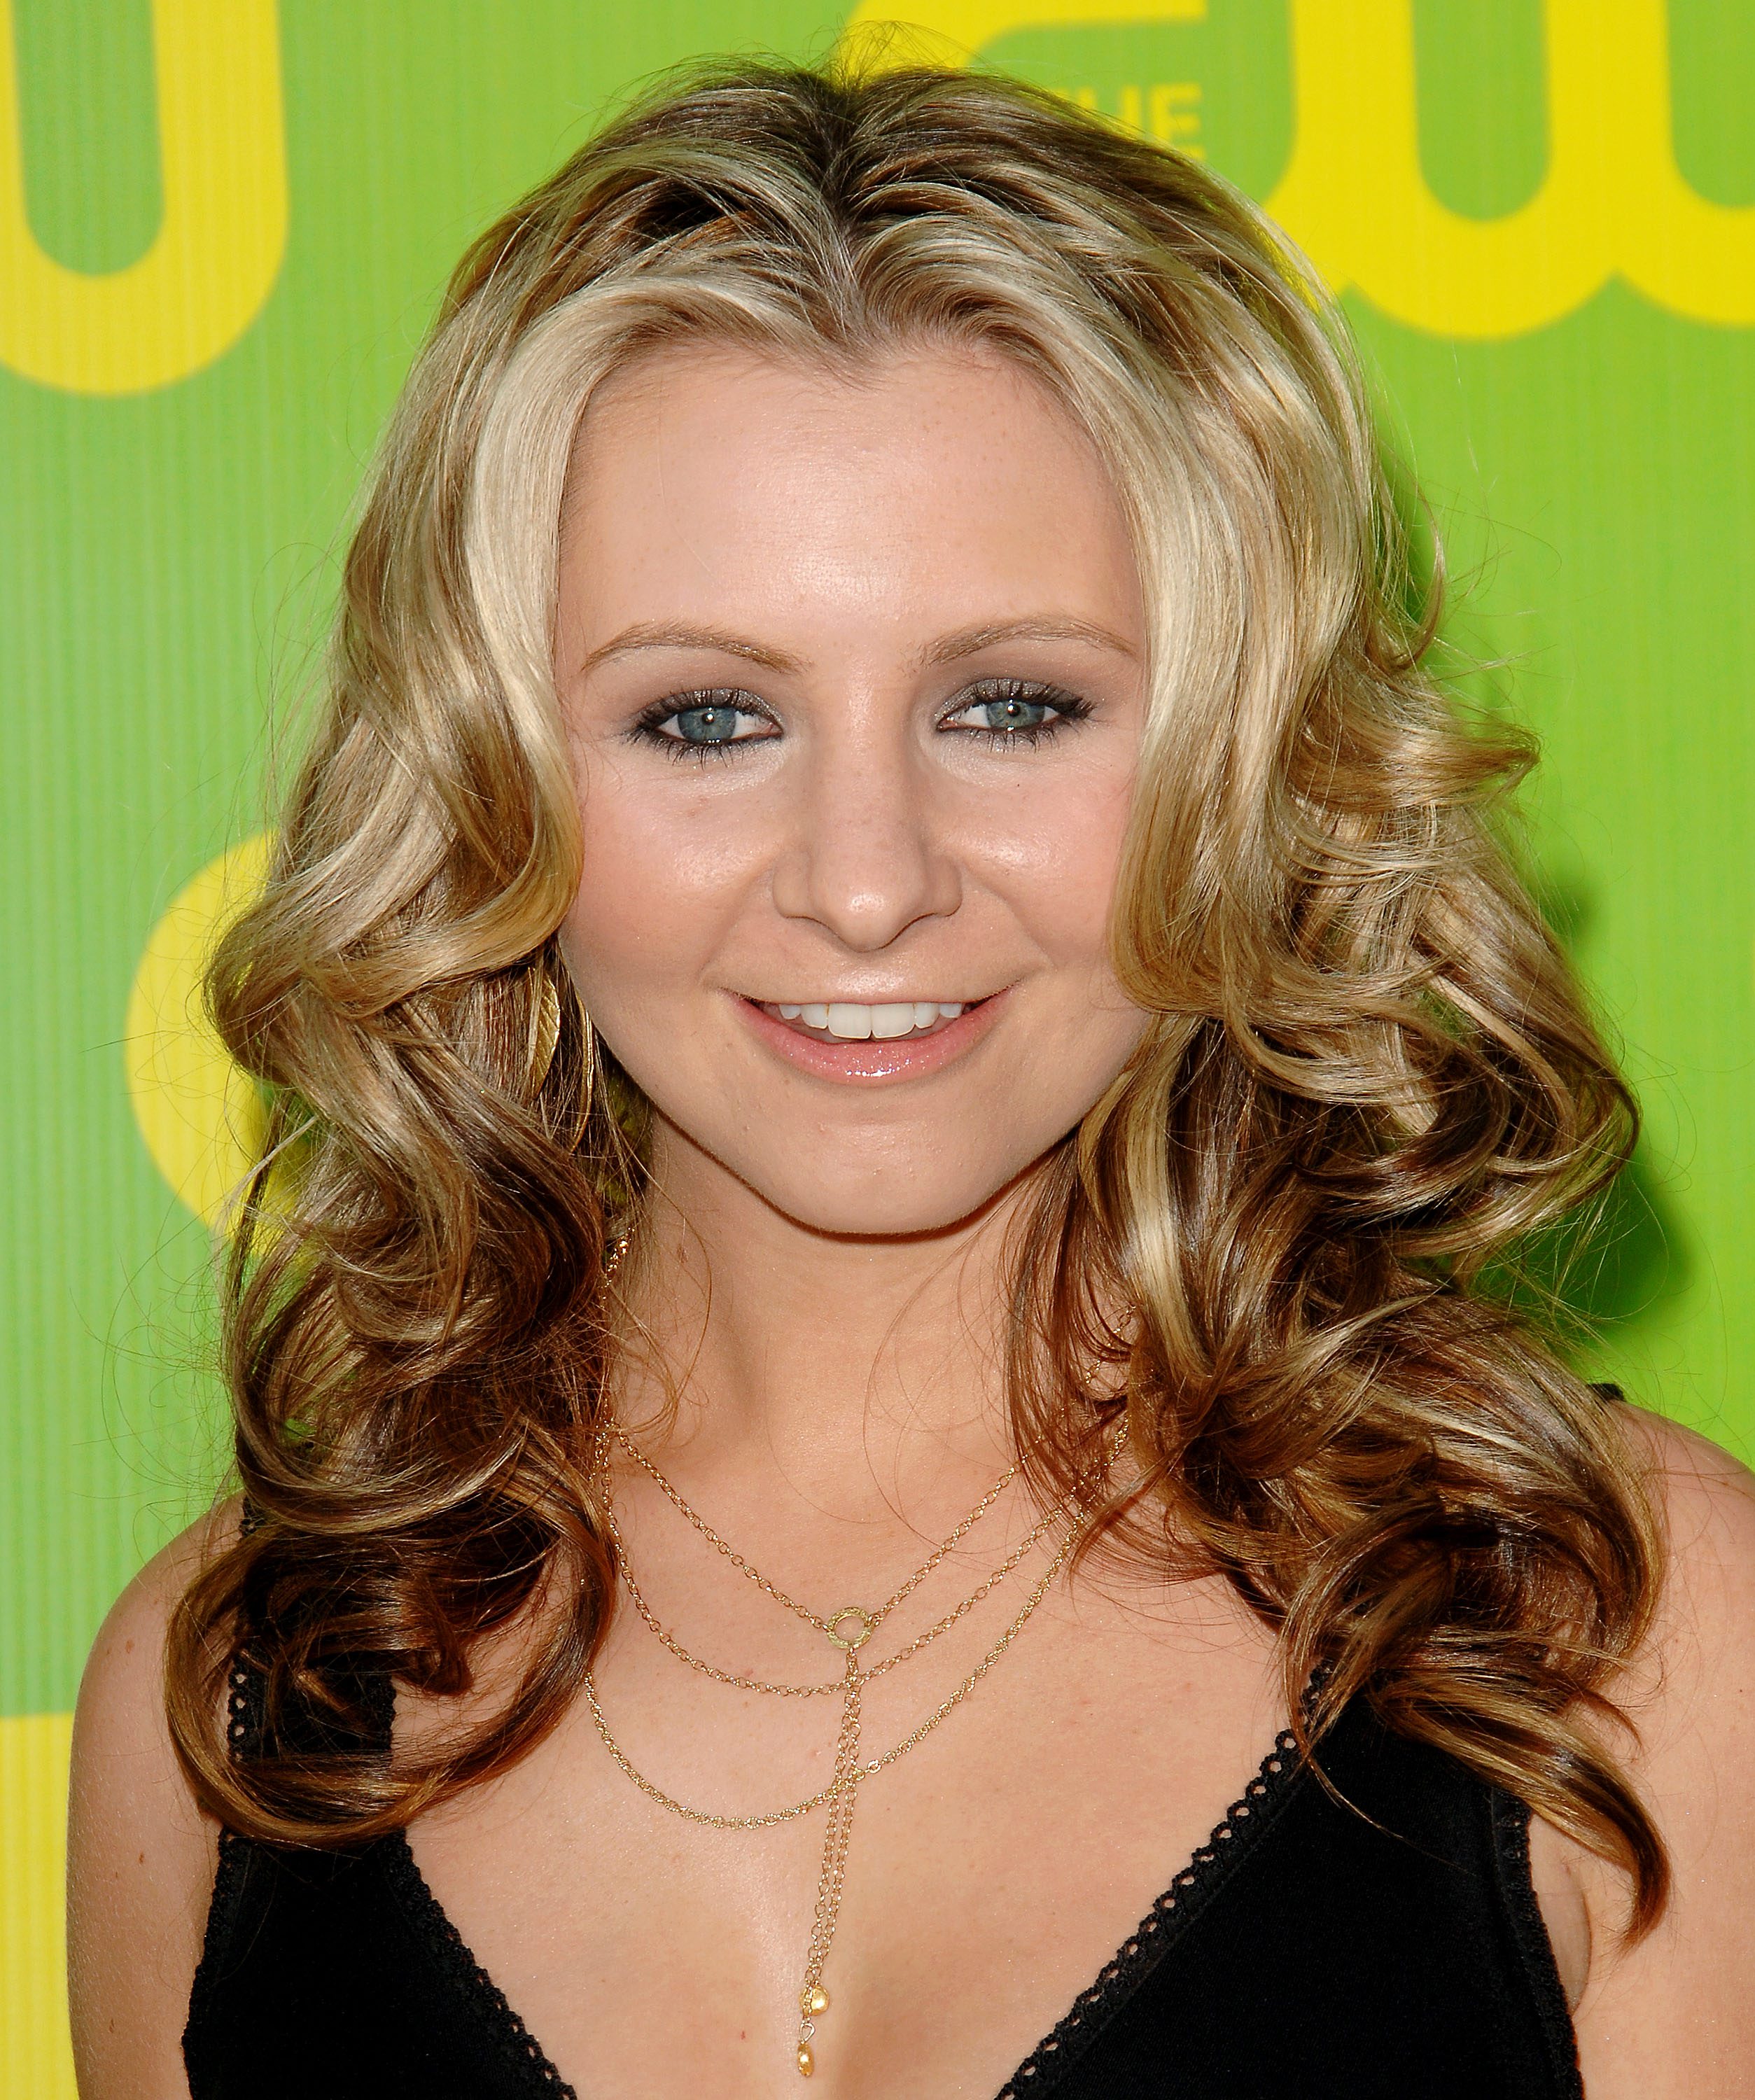 Photo of The CW Launch Party 2006 for fans of Beverley Mitchell. 